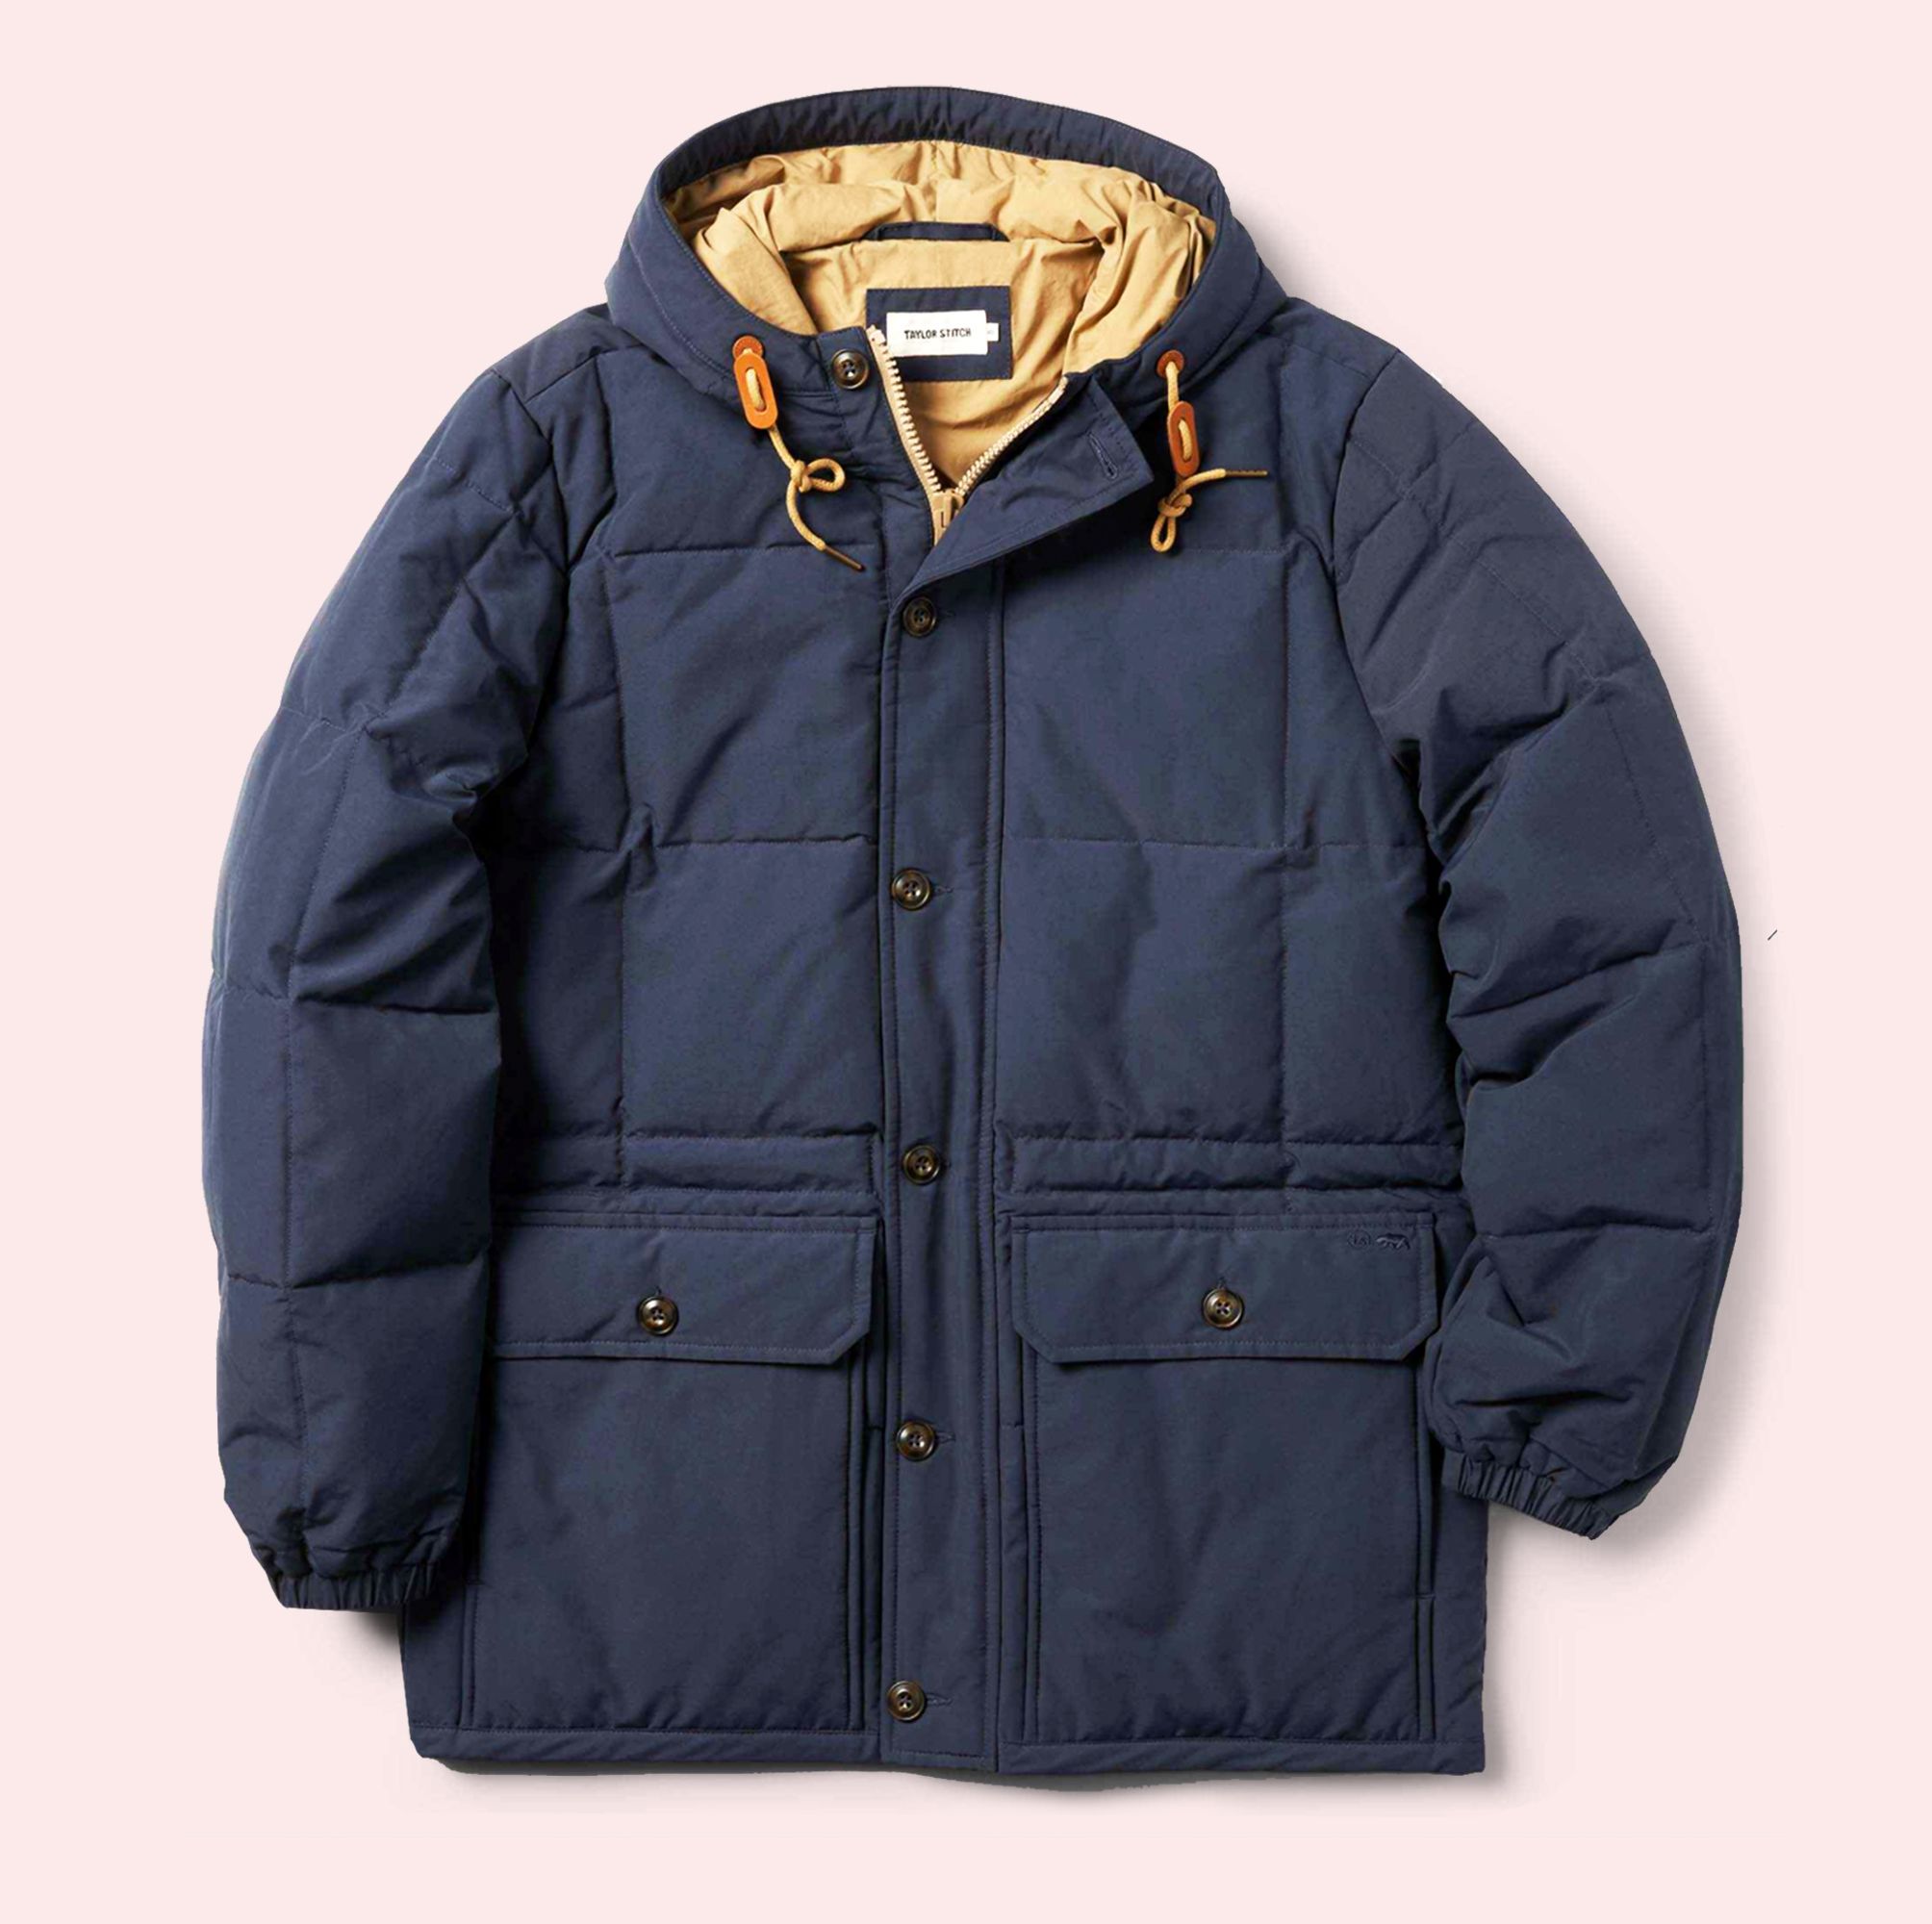 Taylor Stitch Is Taking Up to 50% Off Cold-Weather Essentials